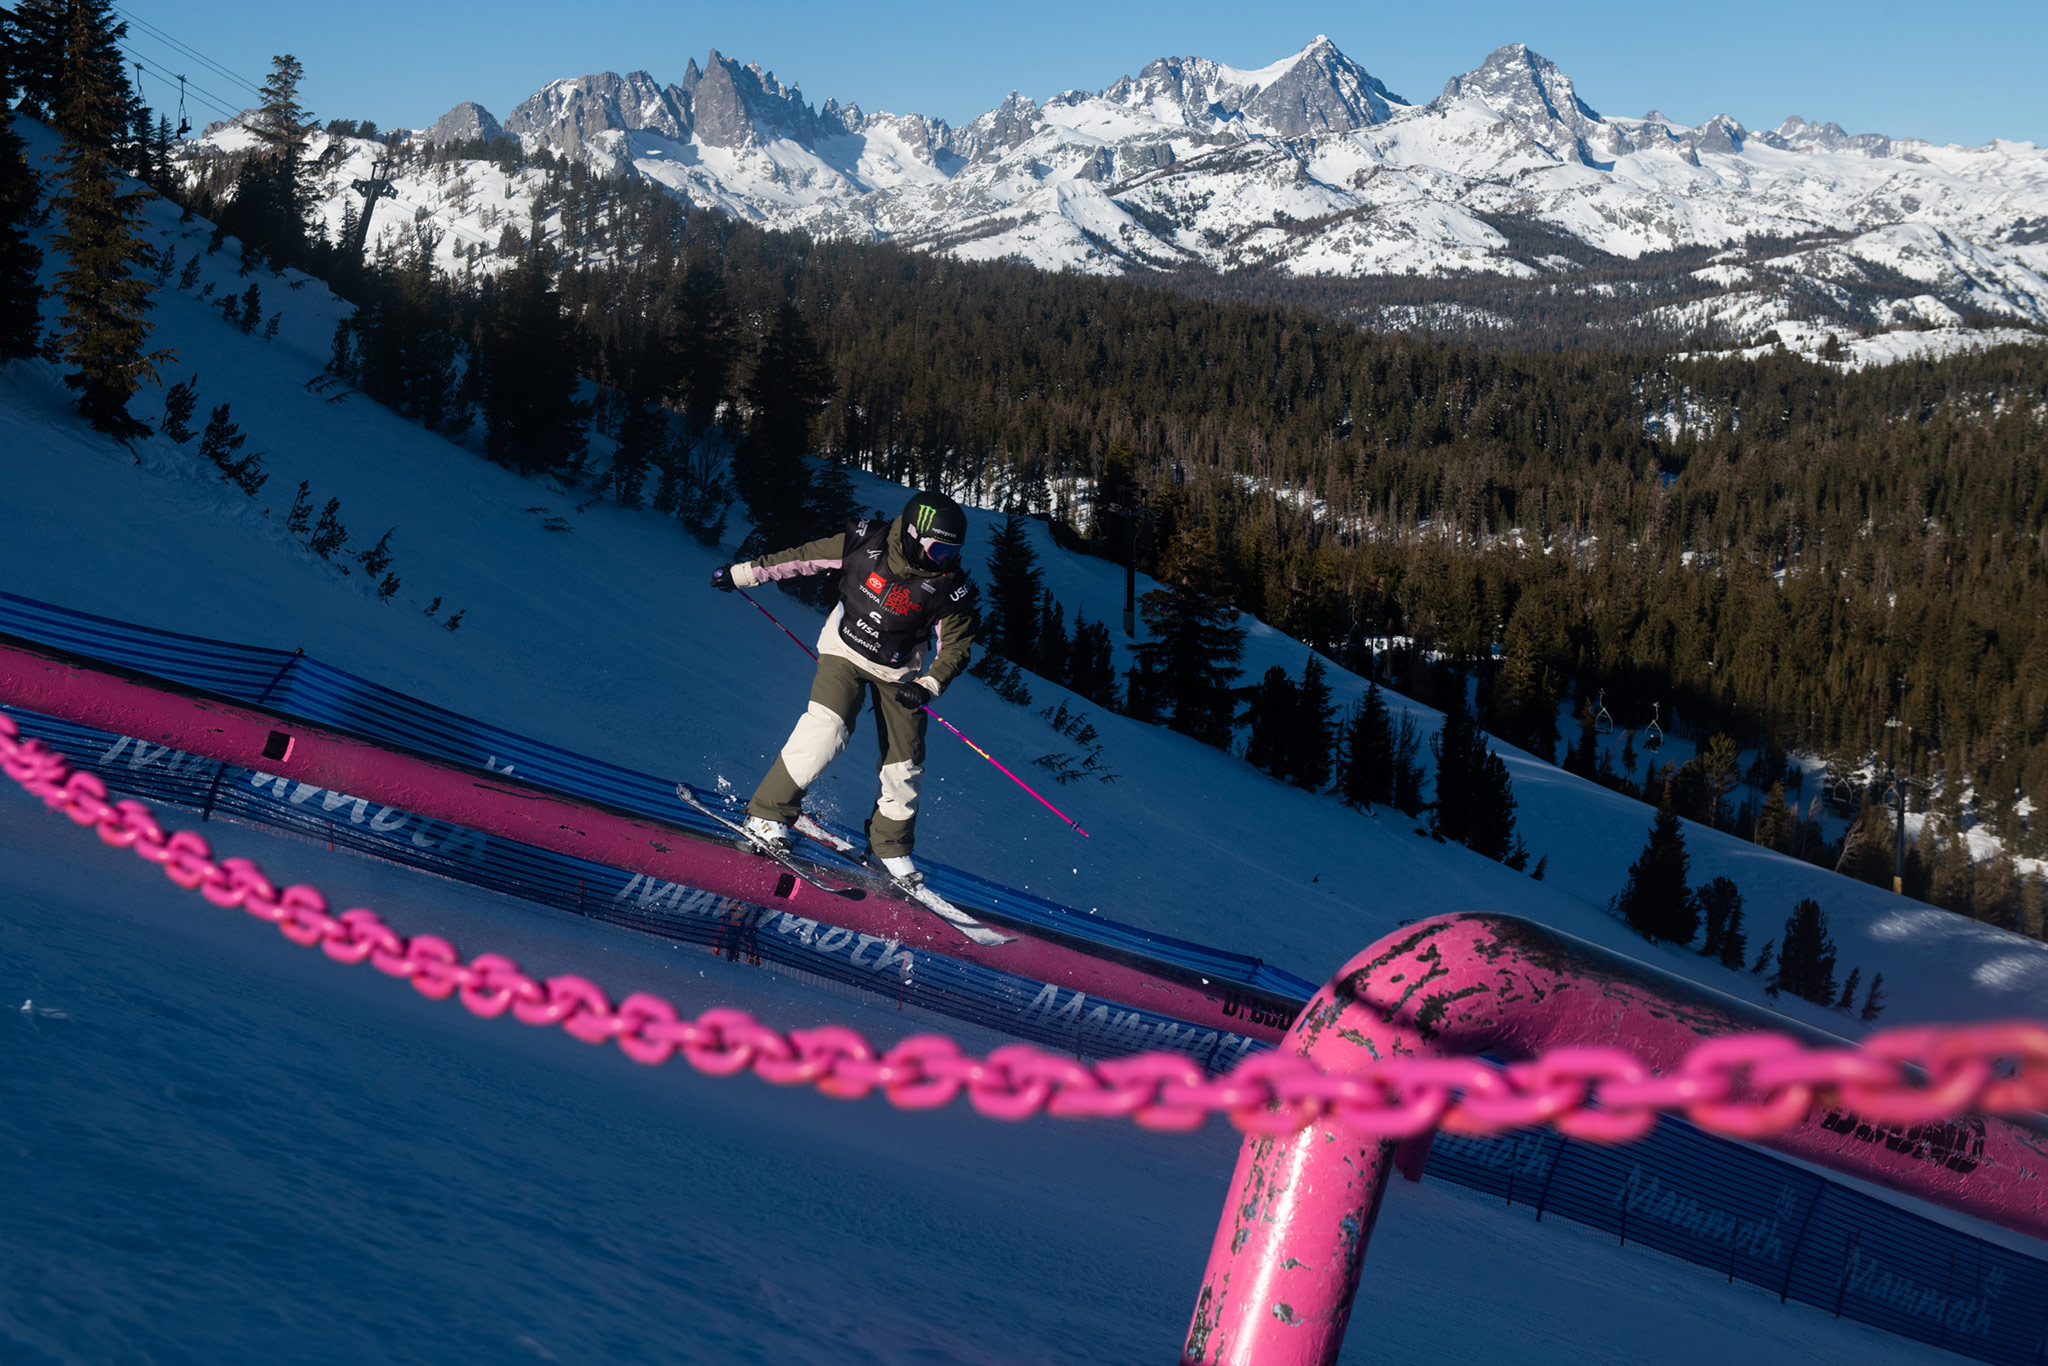 Maggie Voisin at the 2022 US Grand Prix in Mammoth Mountain, California